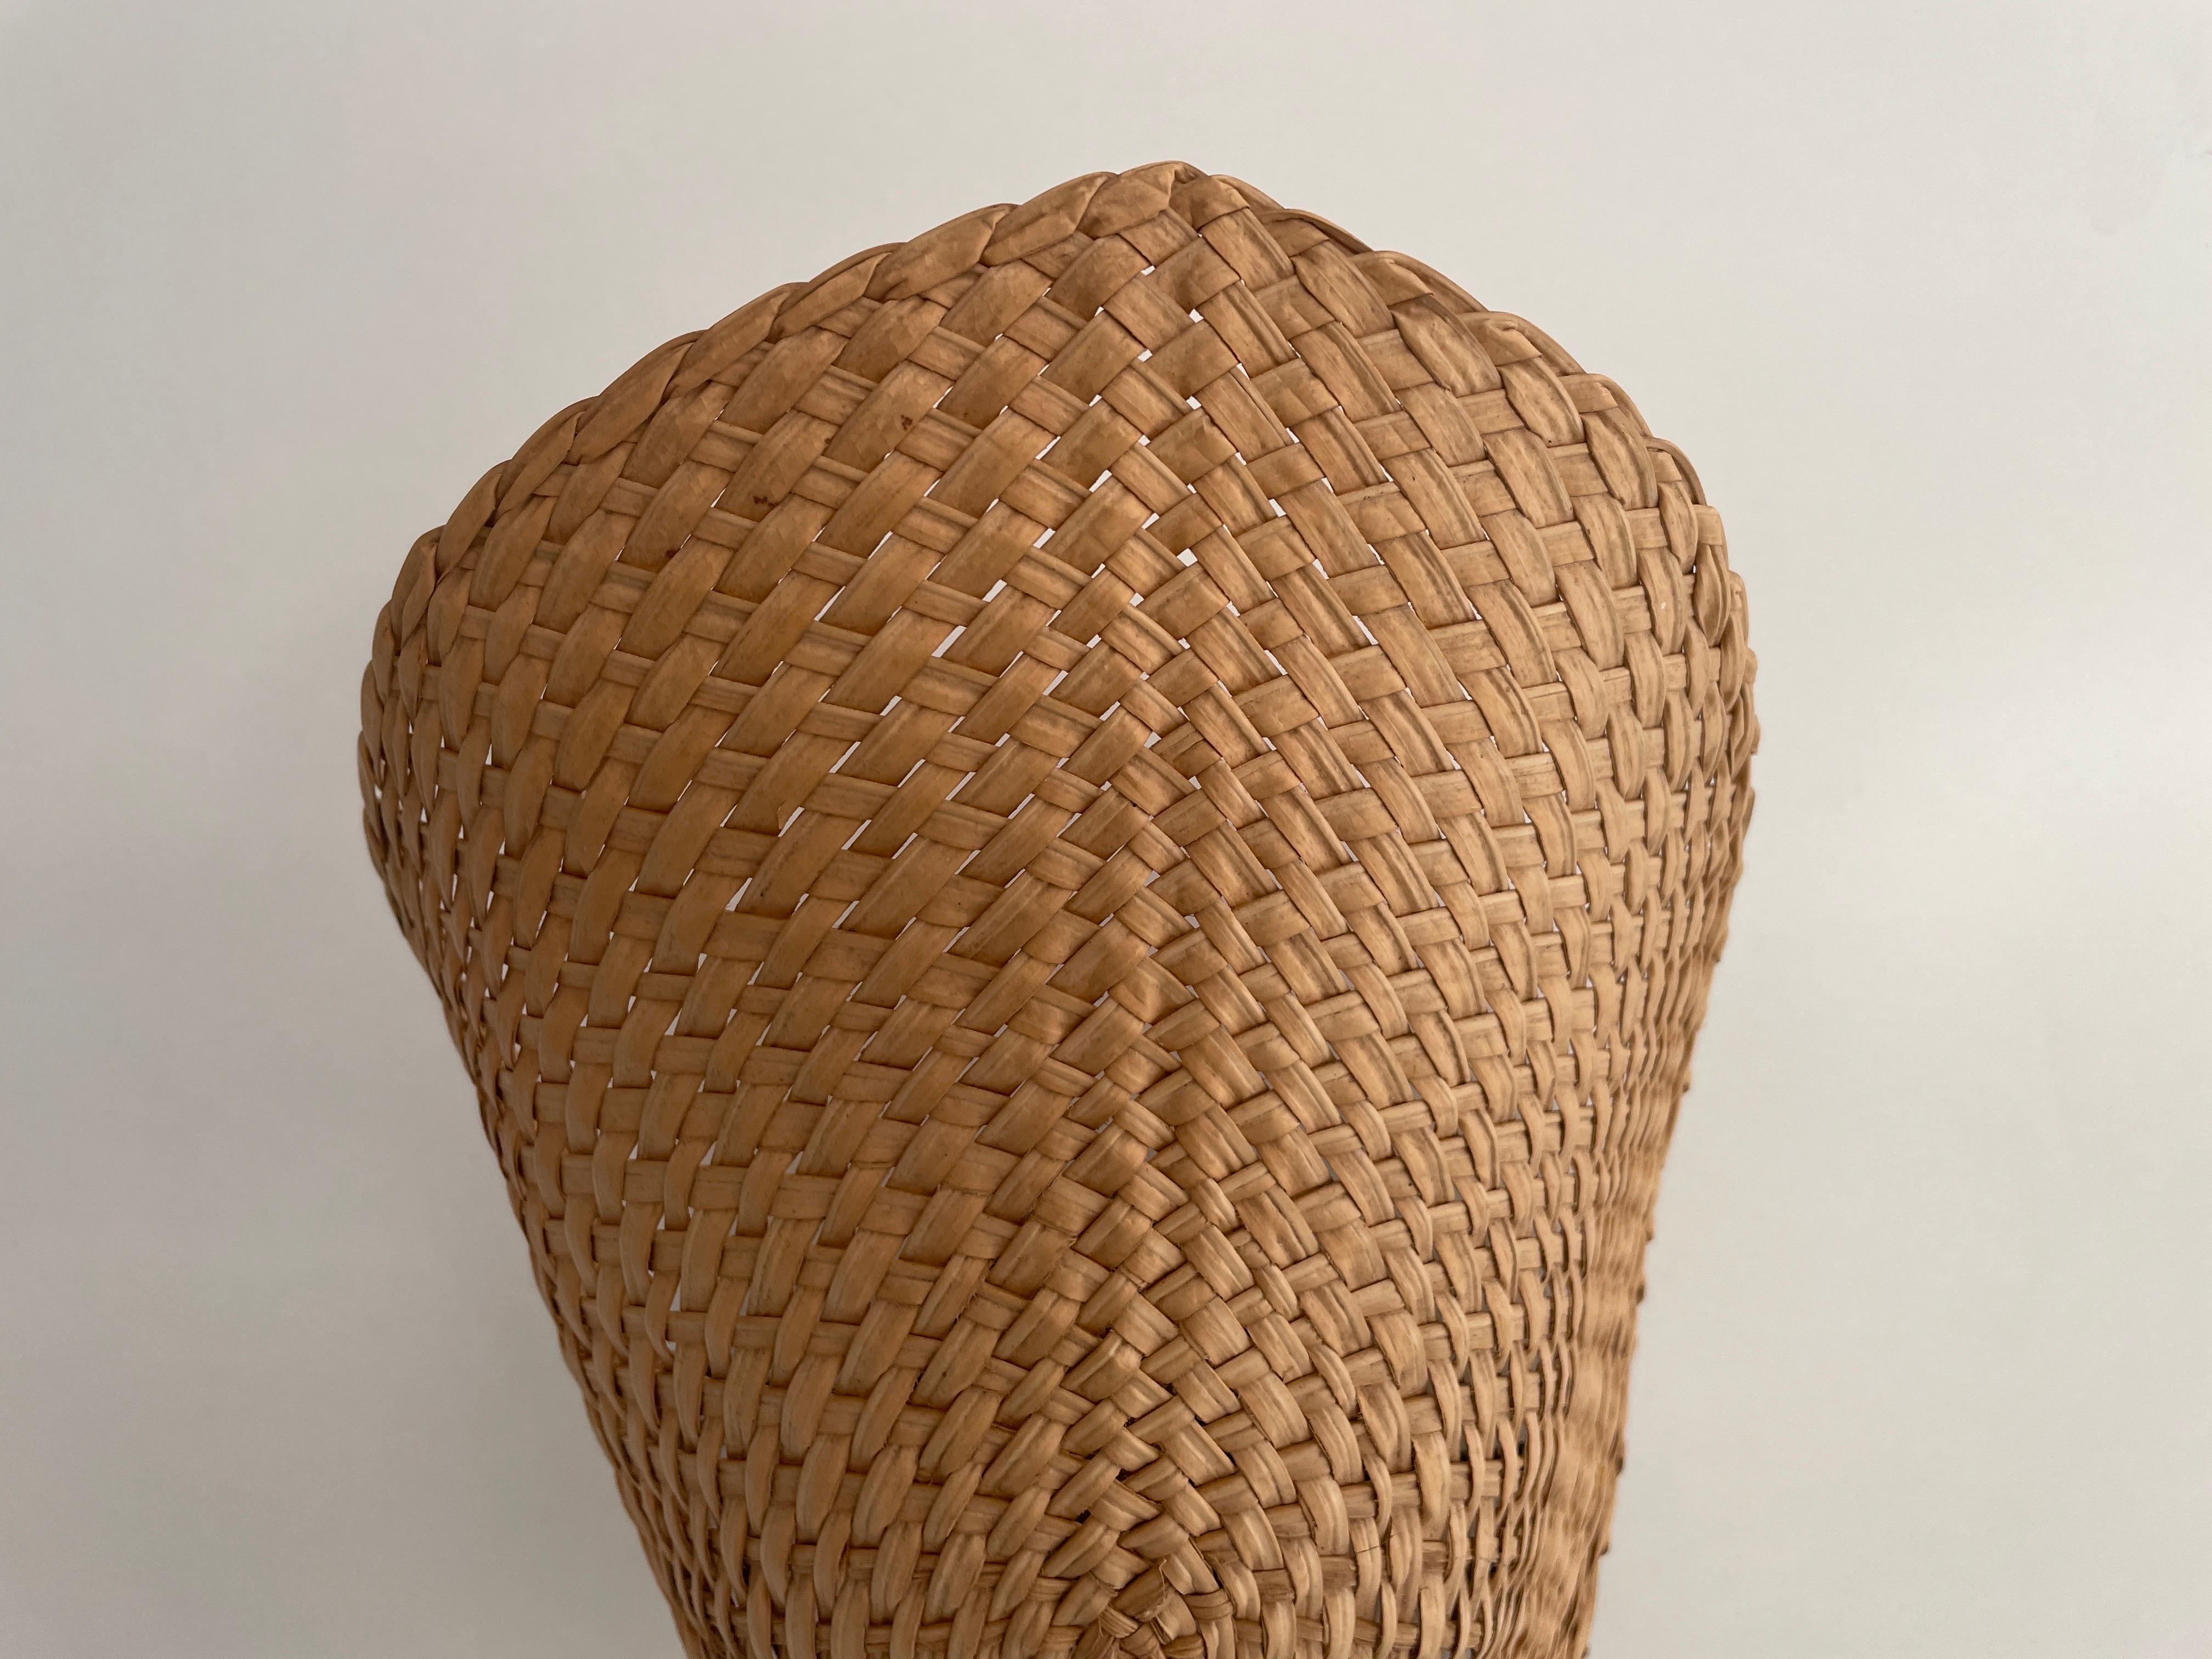 Hand-woven Wicker Palmate Leaf Design Single Sconce, 1960s, Germany In Excellent Condition For Sale In Hagenbach, DE